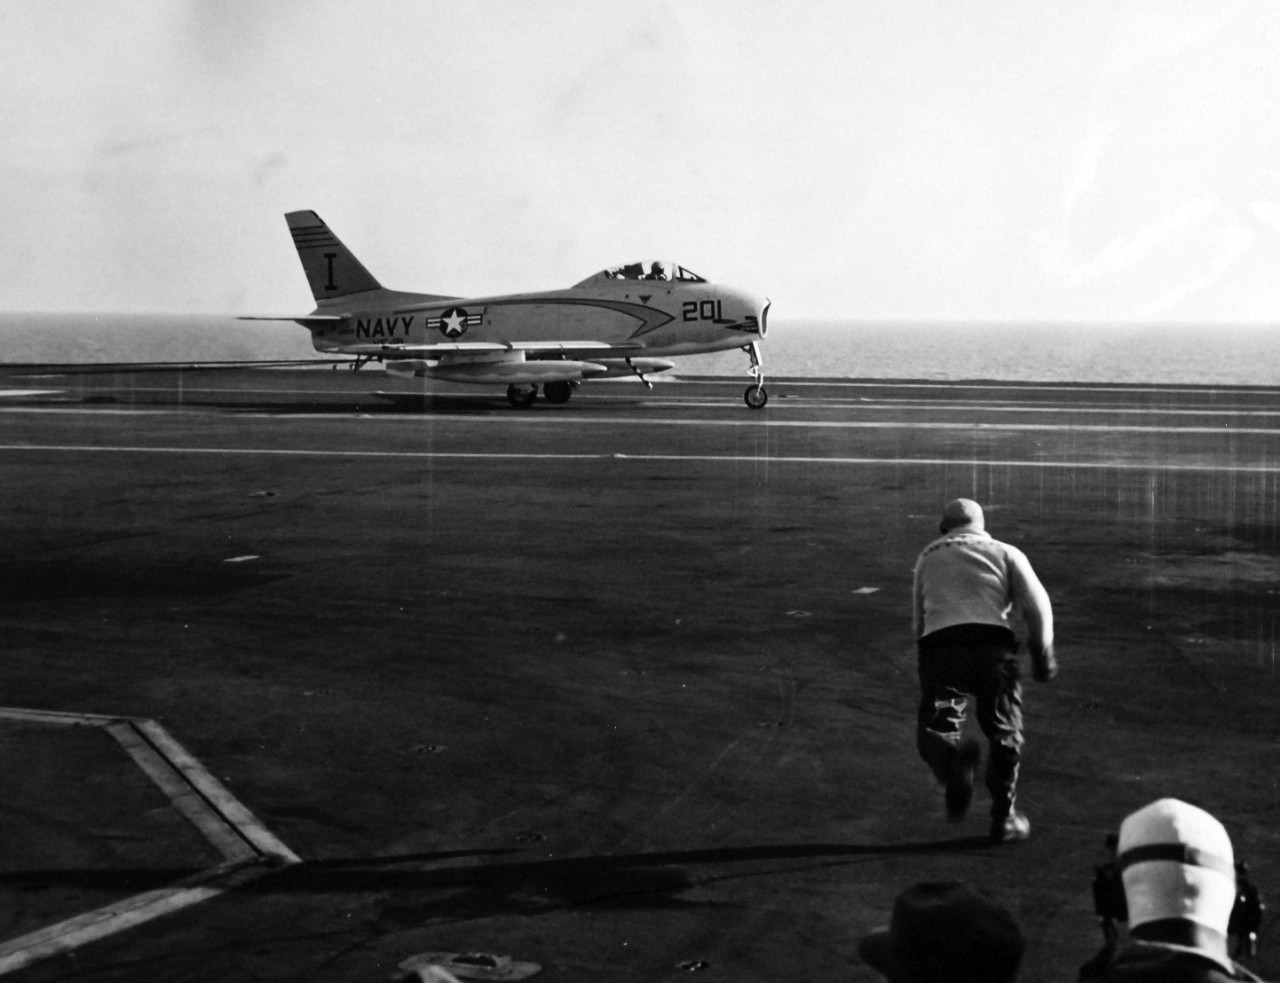 330-PS-7642 (USN 684244):  USS Forrestal (CVA-59), 1956.    Crewmen dash to receive the second jet landing onboard USS Forrestal (CVA-59).  This U.S. Navy FJ-3 “Fury” was piloted by Commander W.M. Harnish, USN.   The first jet landing was performed by Commander R. L. Werner, USN.  Werner commanded Air Task Group 181 (ATG-181) and landed approximately 2:40 (EST), January 3, 1956 while the aircraft carrier, operating at sea east of Norfolk, Virginia, was undergoing a series of routine tests.  Commander Werner made three touch-and-go landings before making the first full-stop landing.  A few hours later, piloting the same aircraft, he also made the first catapult launch from the carrier.   Aircraft used for these trials are based at the U.S. Naval Air Station, Oceana, Virginia.  Later, at approximately, 2:45 (EST), Commander W.M. Harnish, USN, Commanding Officer, Squadron 21 (a unit of ATG-181), piloting a U.S. Navy FJ-3 “Fury” made the second landing on board Forrestal.    Commander Harnish’s father, Mr. W.E. Harnish, was the Professor of Education at the University of Illinois.  Lieutenant Vincent Darcey, USN, of ATG-181, was the Landing Signal Officer for both landings.  Both aircraft were painted with the new white and grey “atomic” paint scheme.    Photograph released January 4, 1956.   Offical U.S. Navy Photograph, now in the collections of the National Archives.  (2015/02/18)  